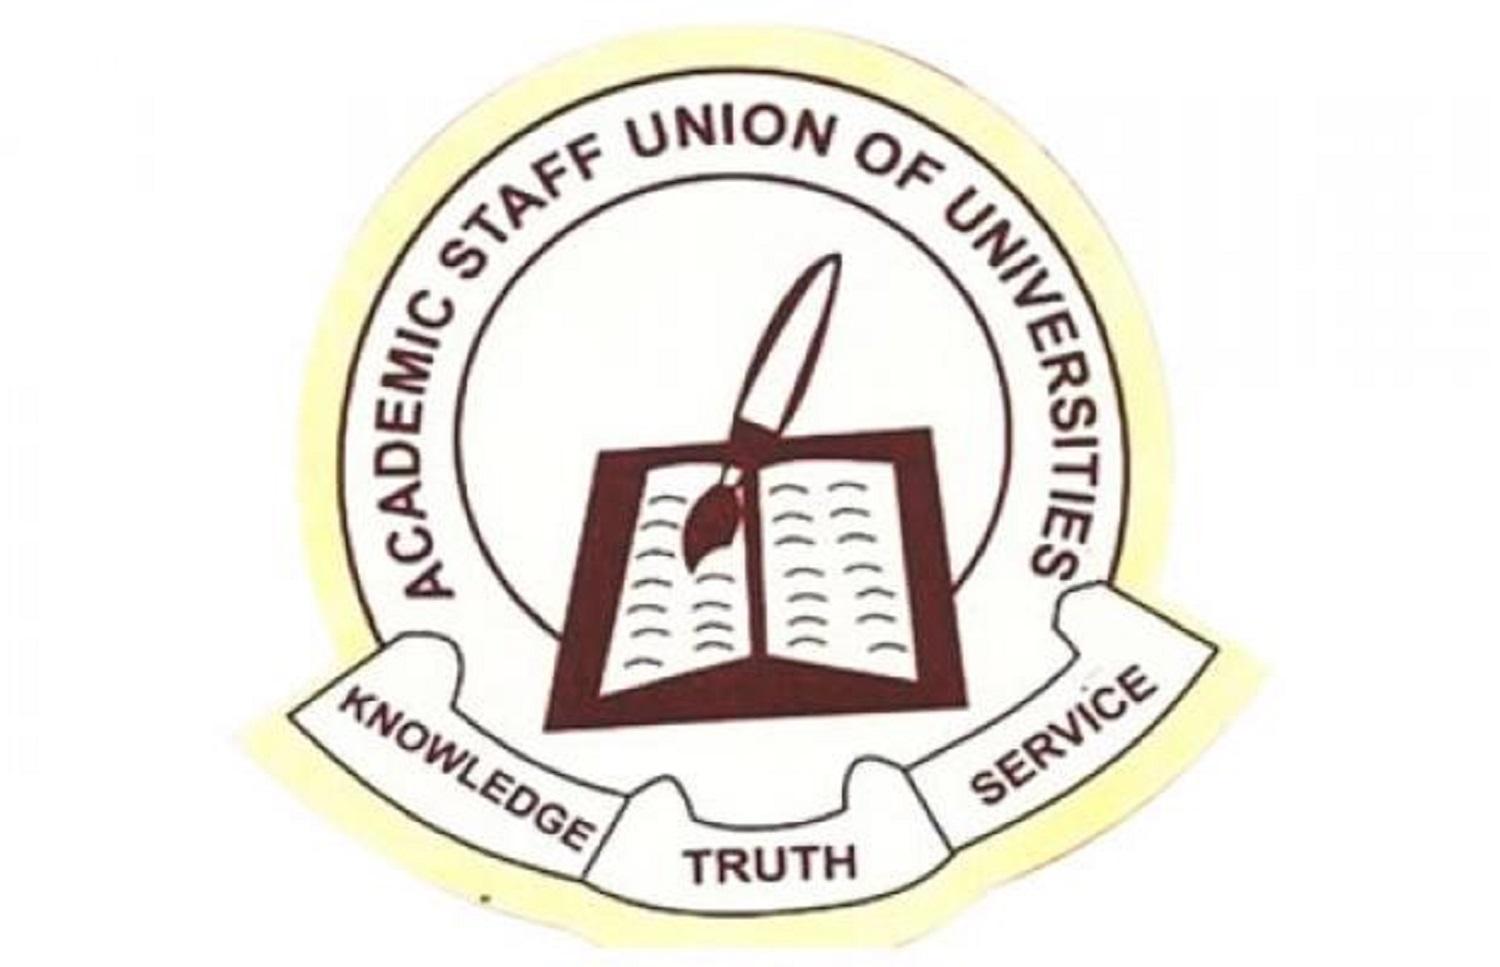 FG Moves To Meet ASUU’s Demands, Constitutes White Paper Panel